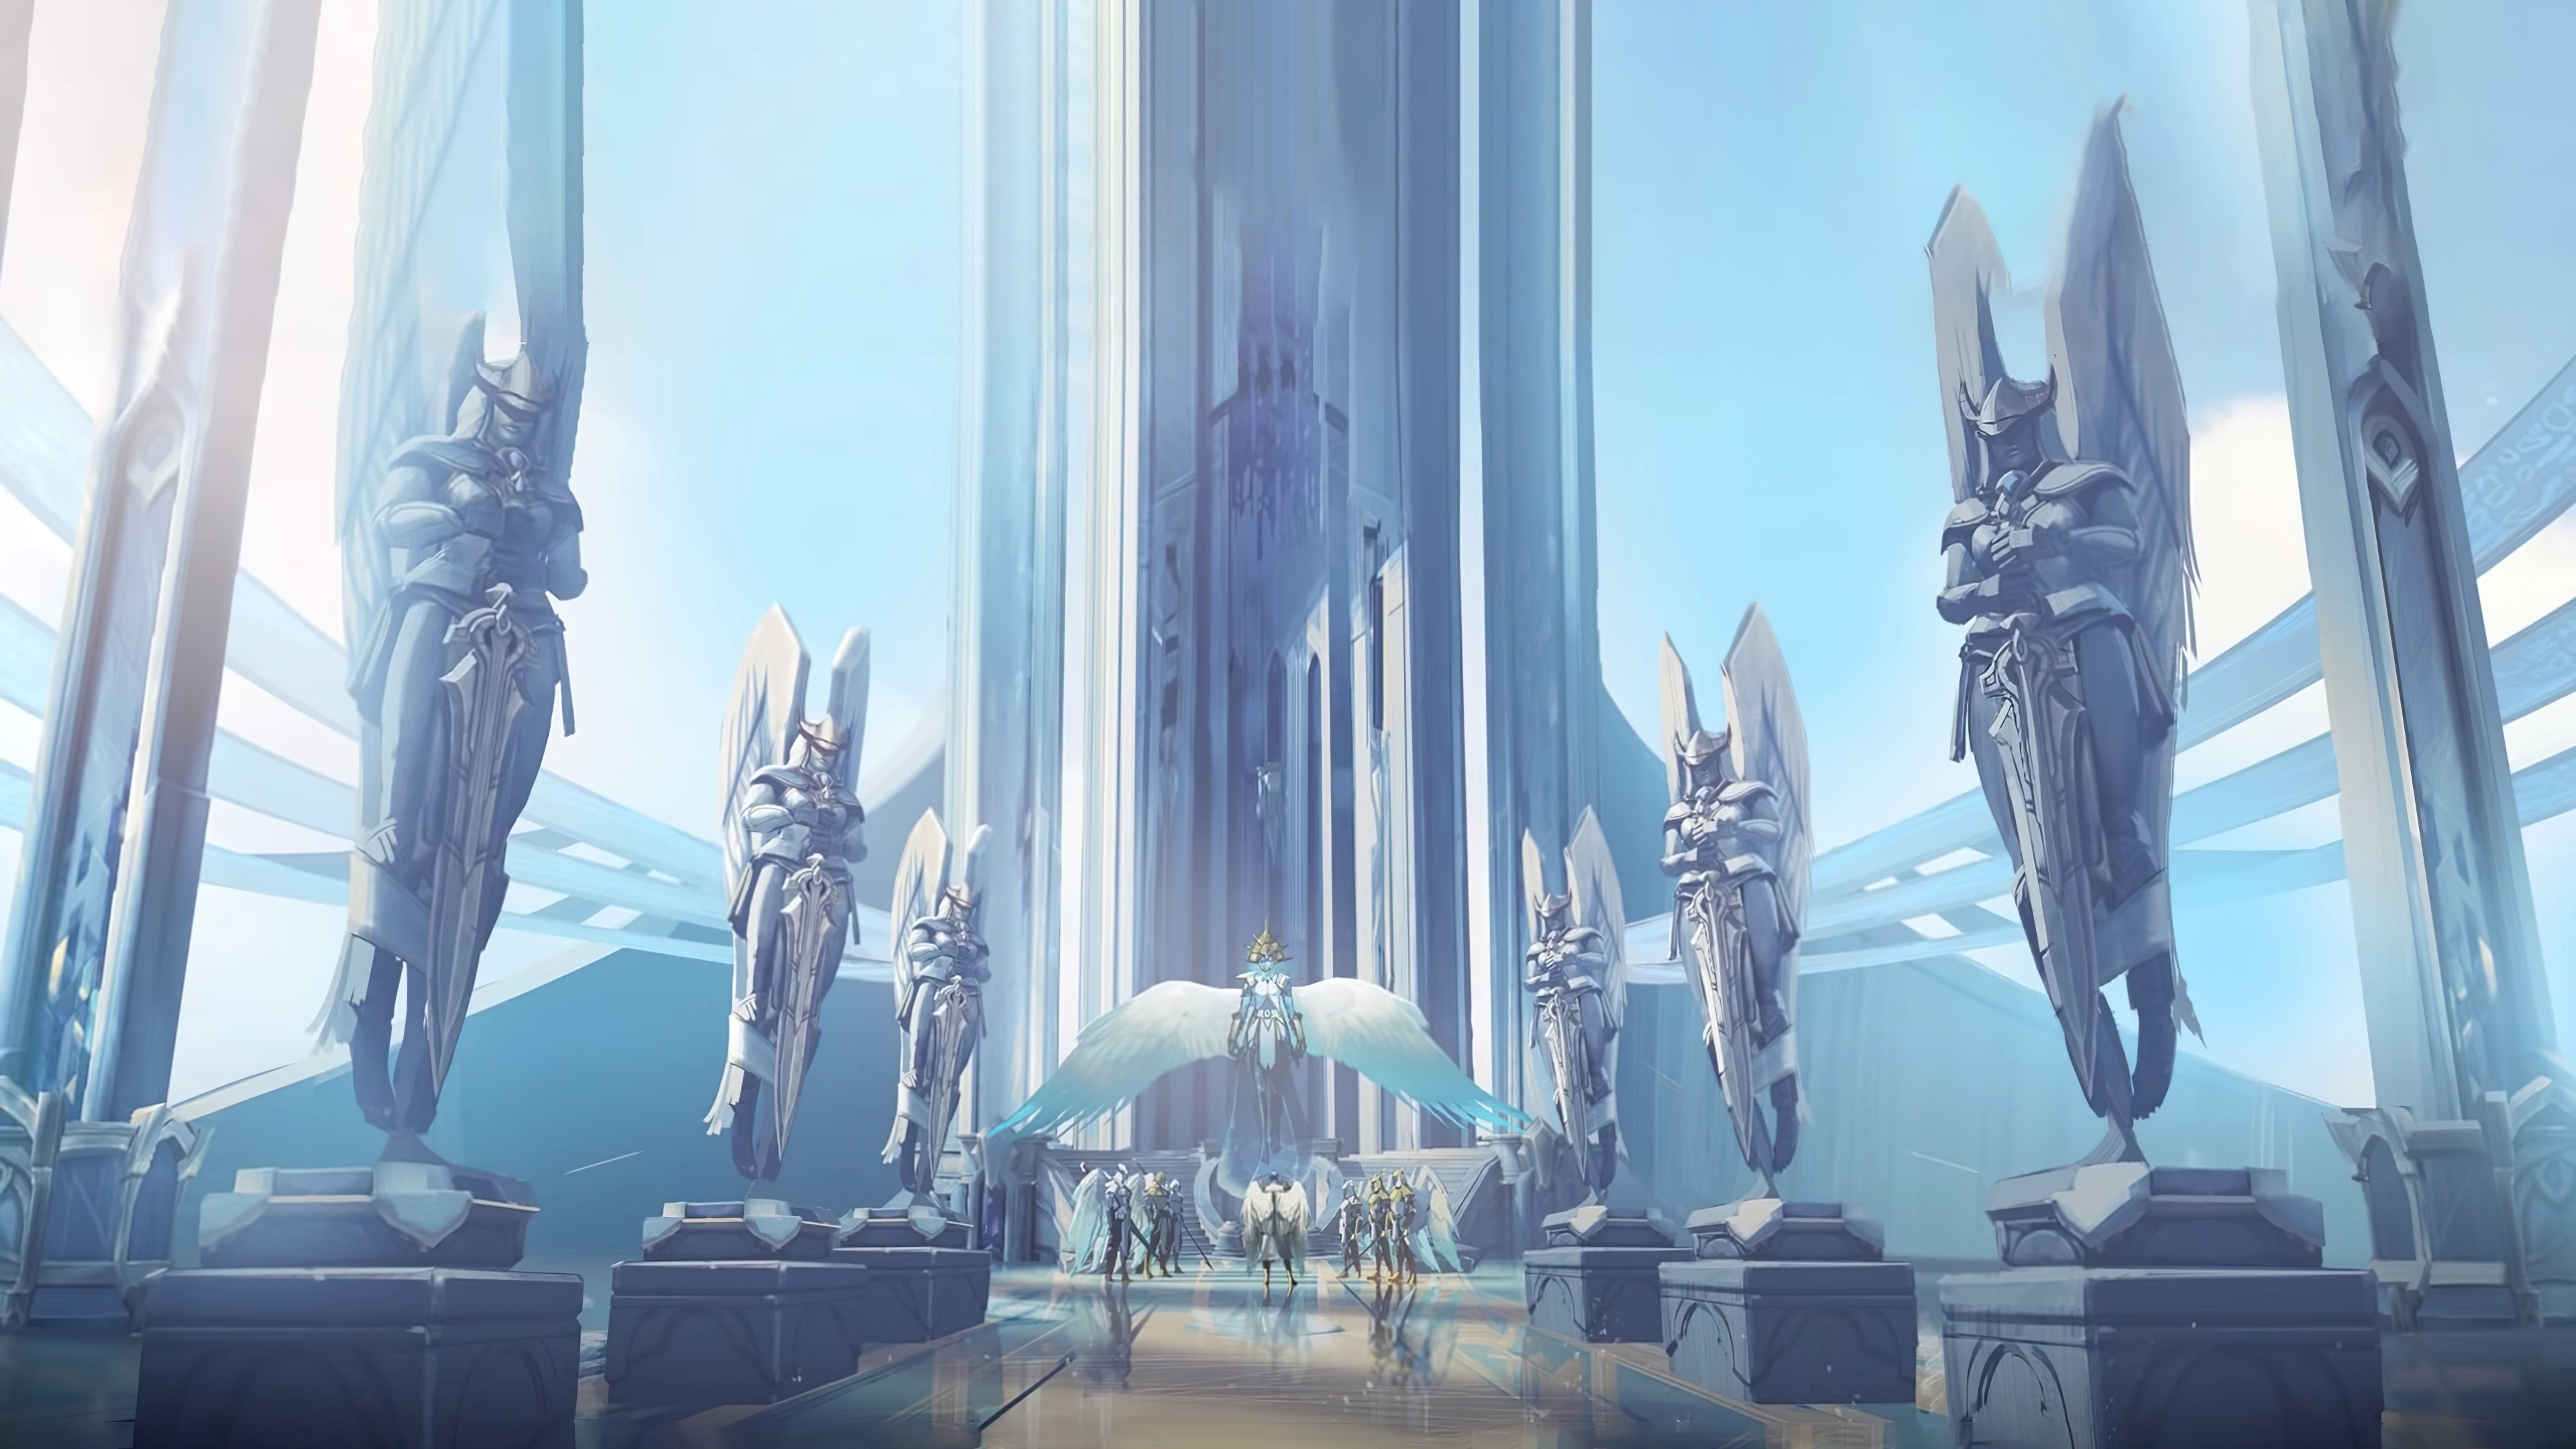 WoW Bastion, Afterlives, Serenity, Ethereal structures, Angelic guardians, 3840x2160 4K Desktop